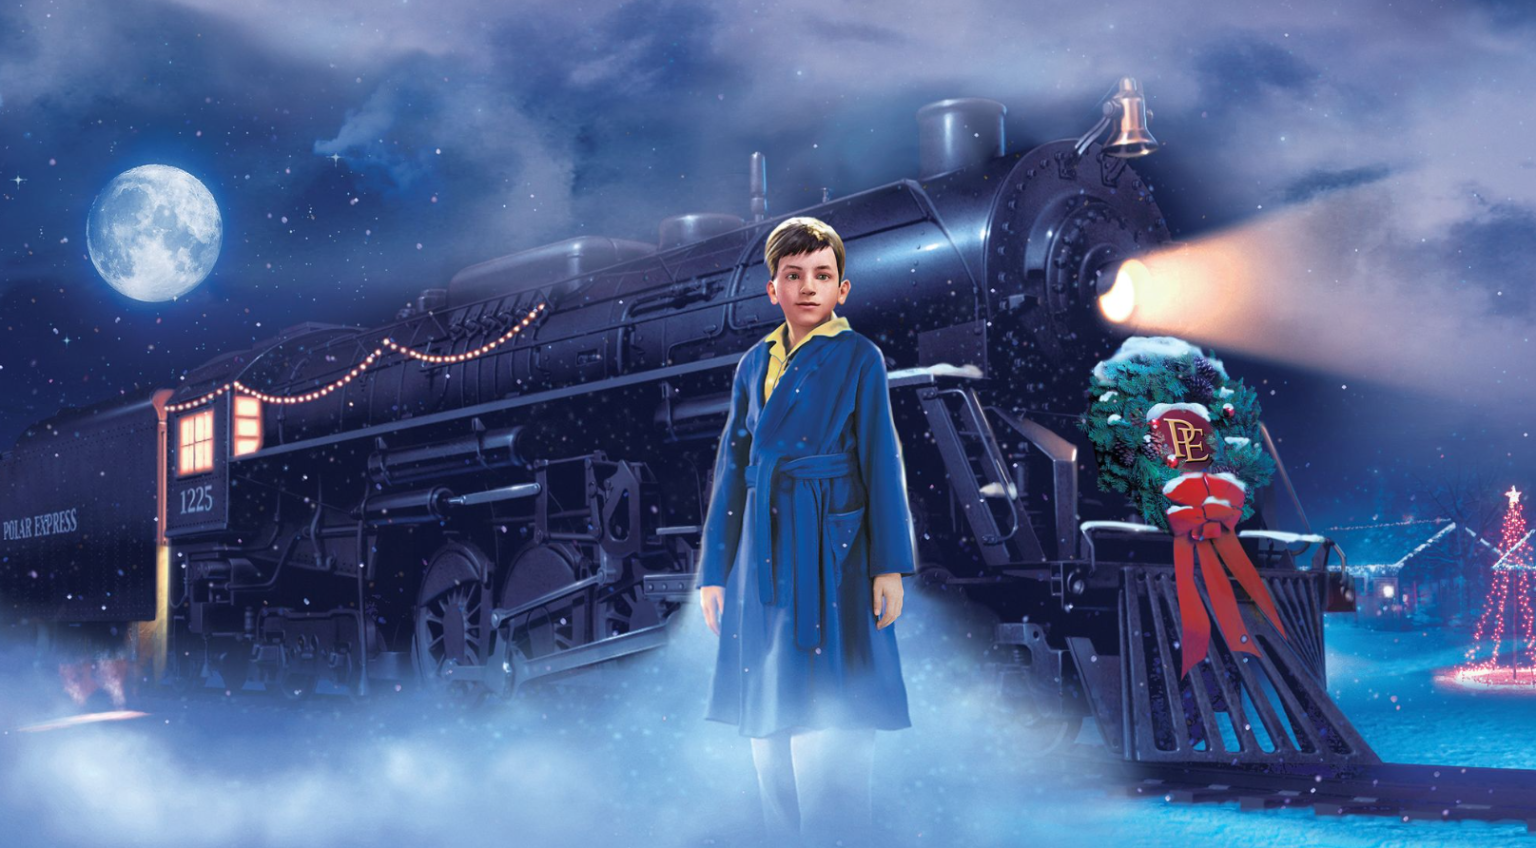 how-to-watch-the-polar-express-on-netflix-guide-steps